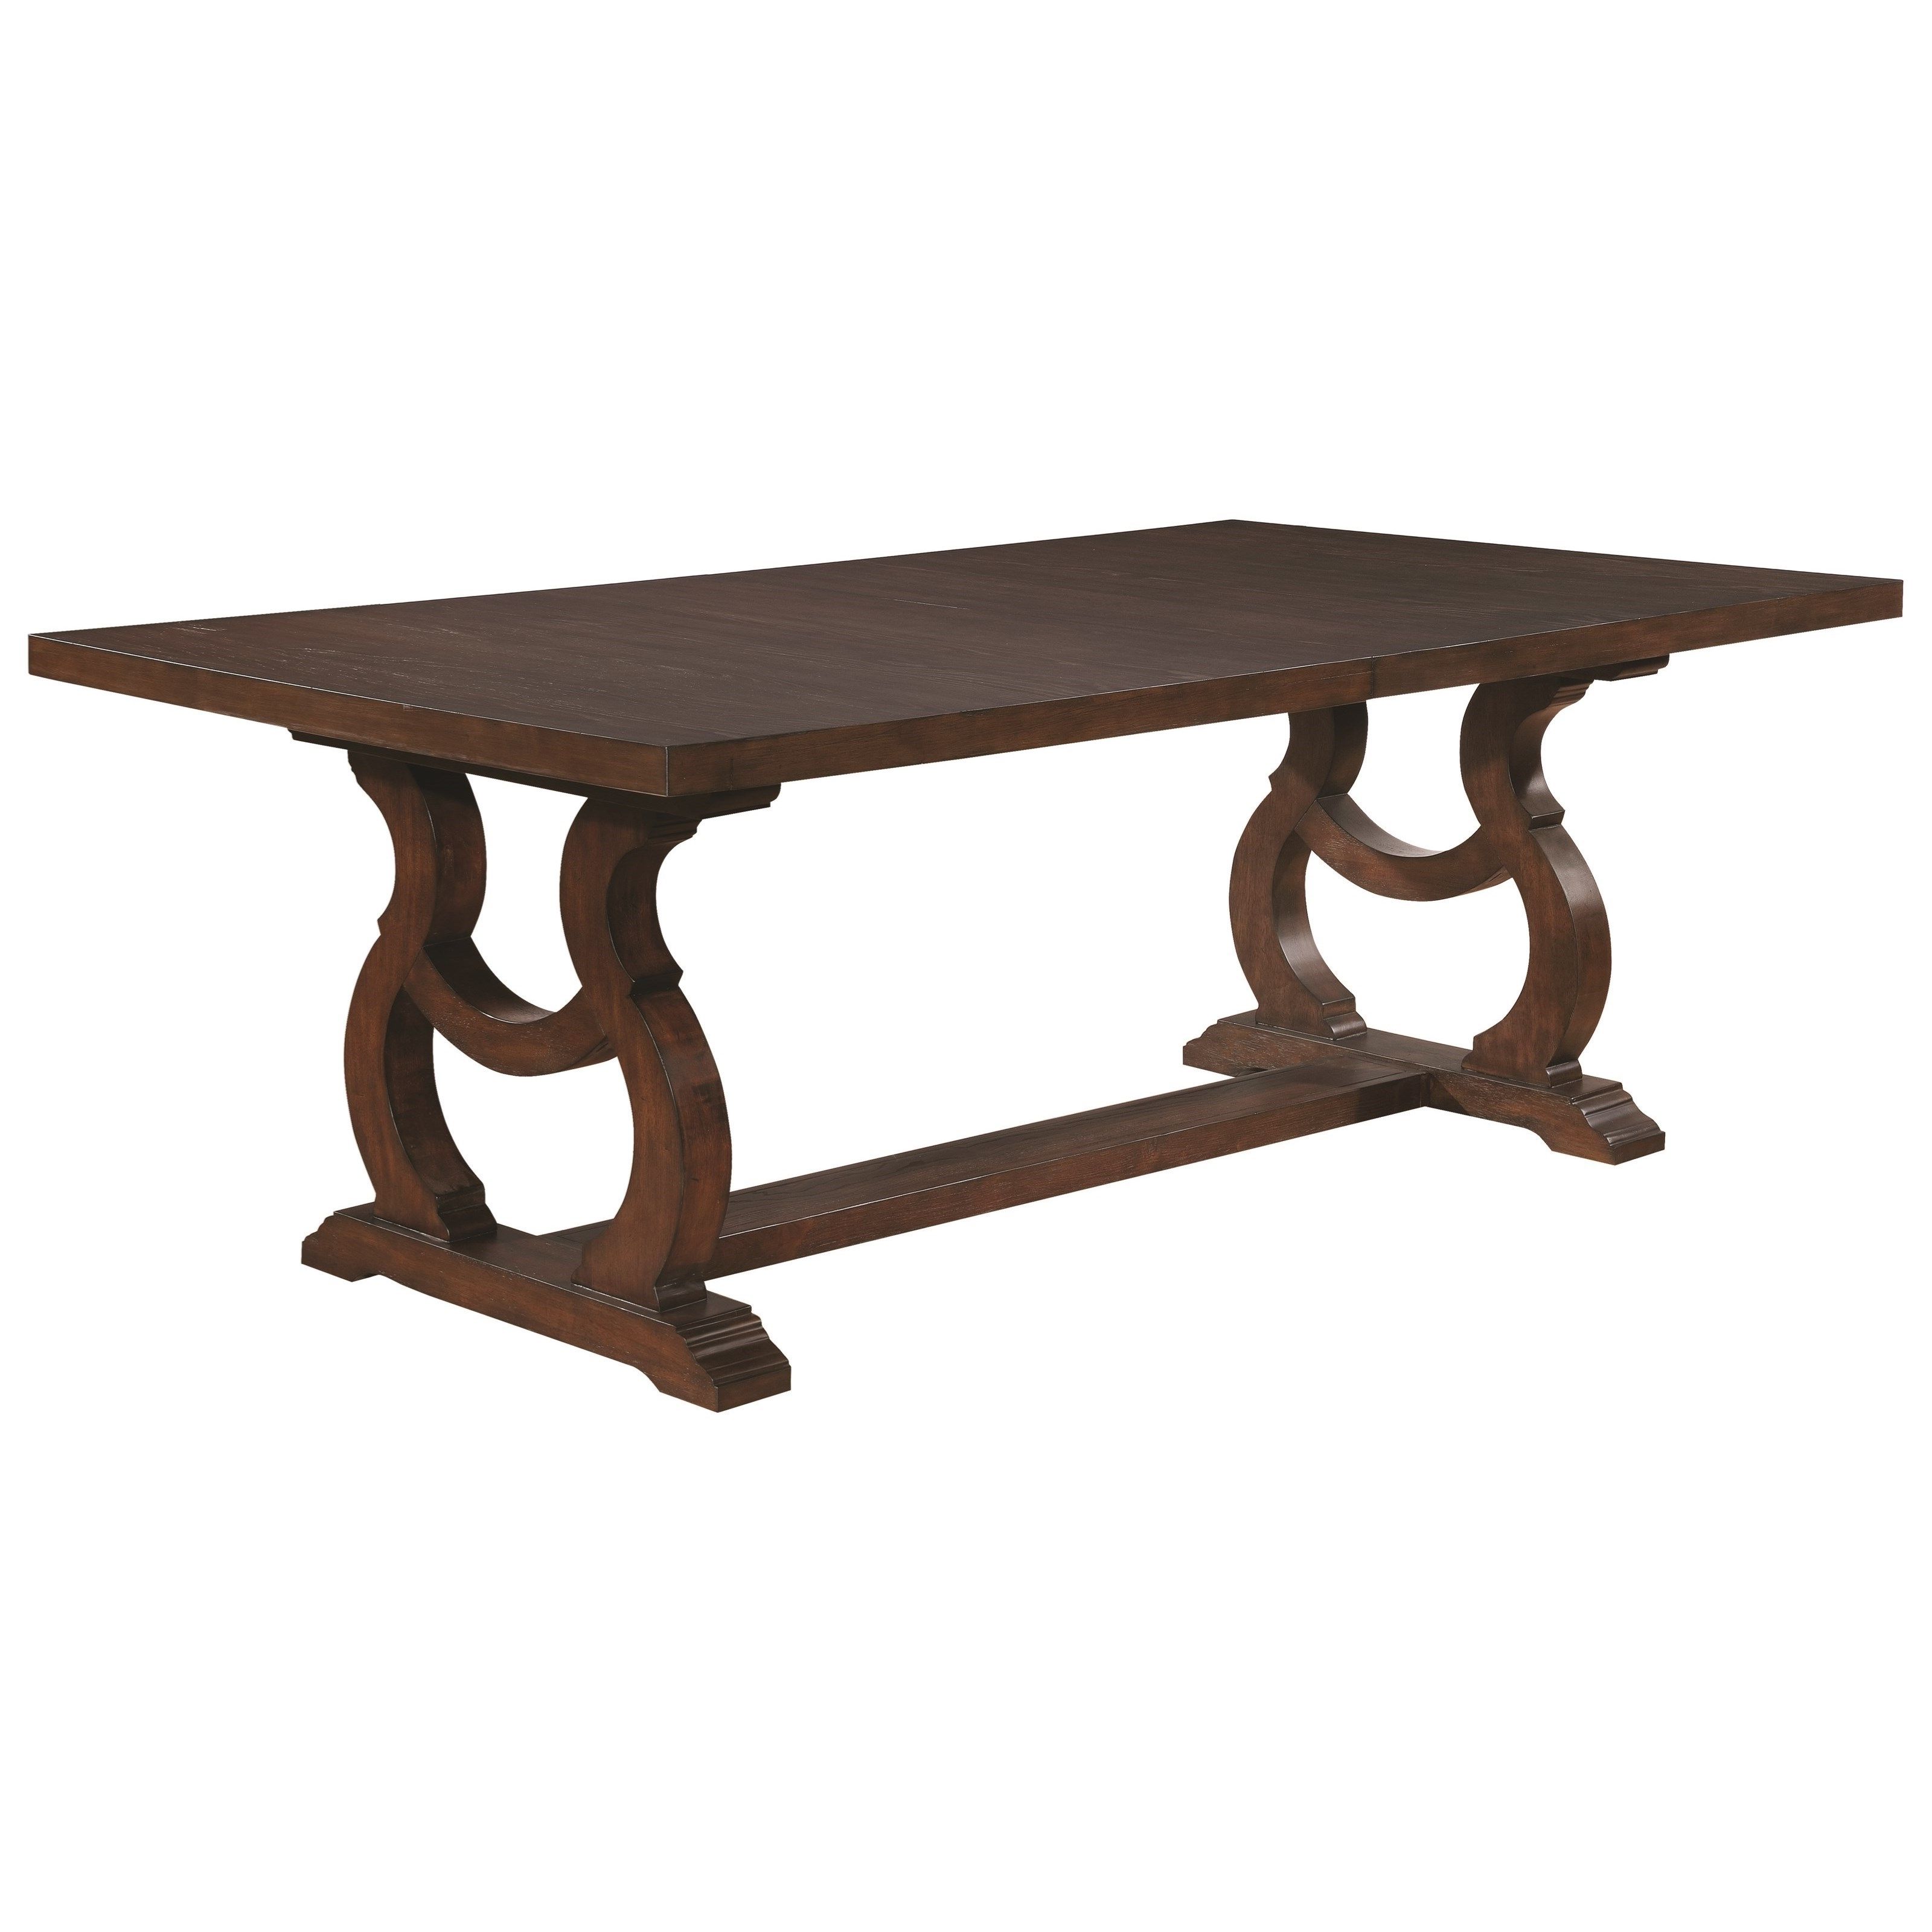 Well Known Java Dining Tables Intended For Scott Living Glen Cove Antique Java Traditional Dining Table With (View 9 of 25)